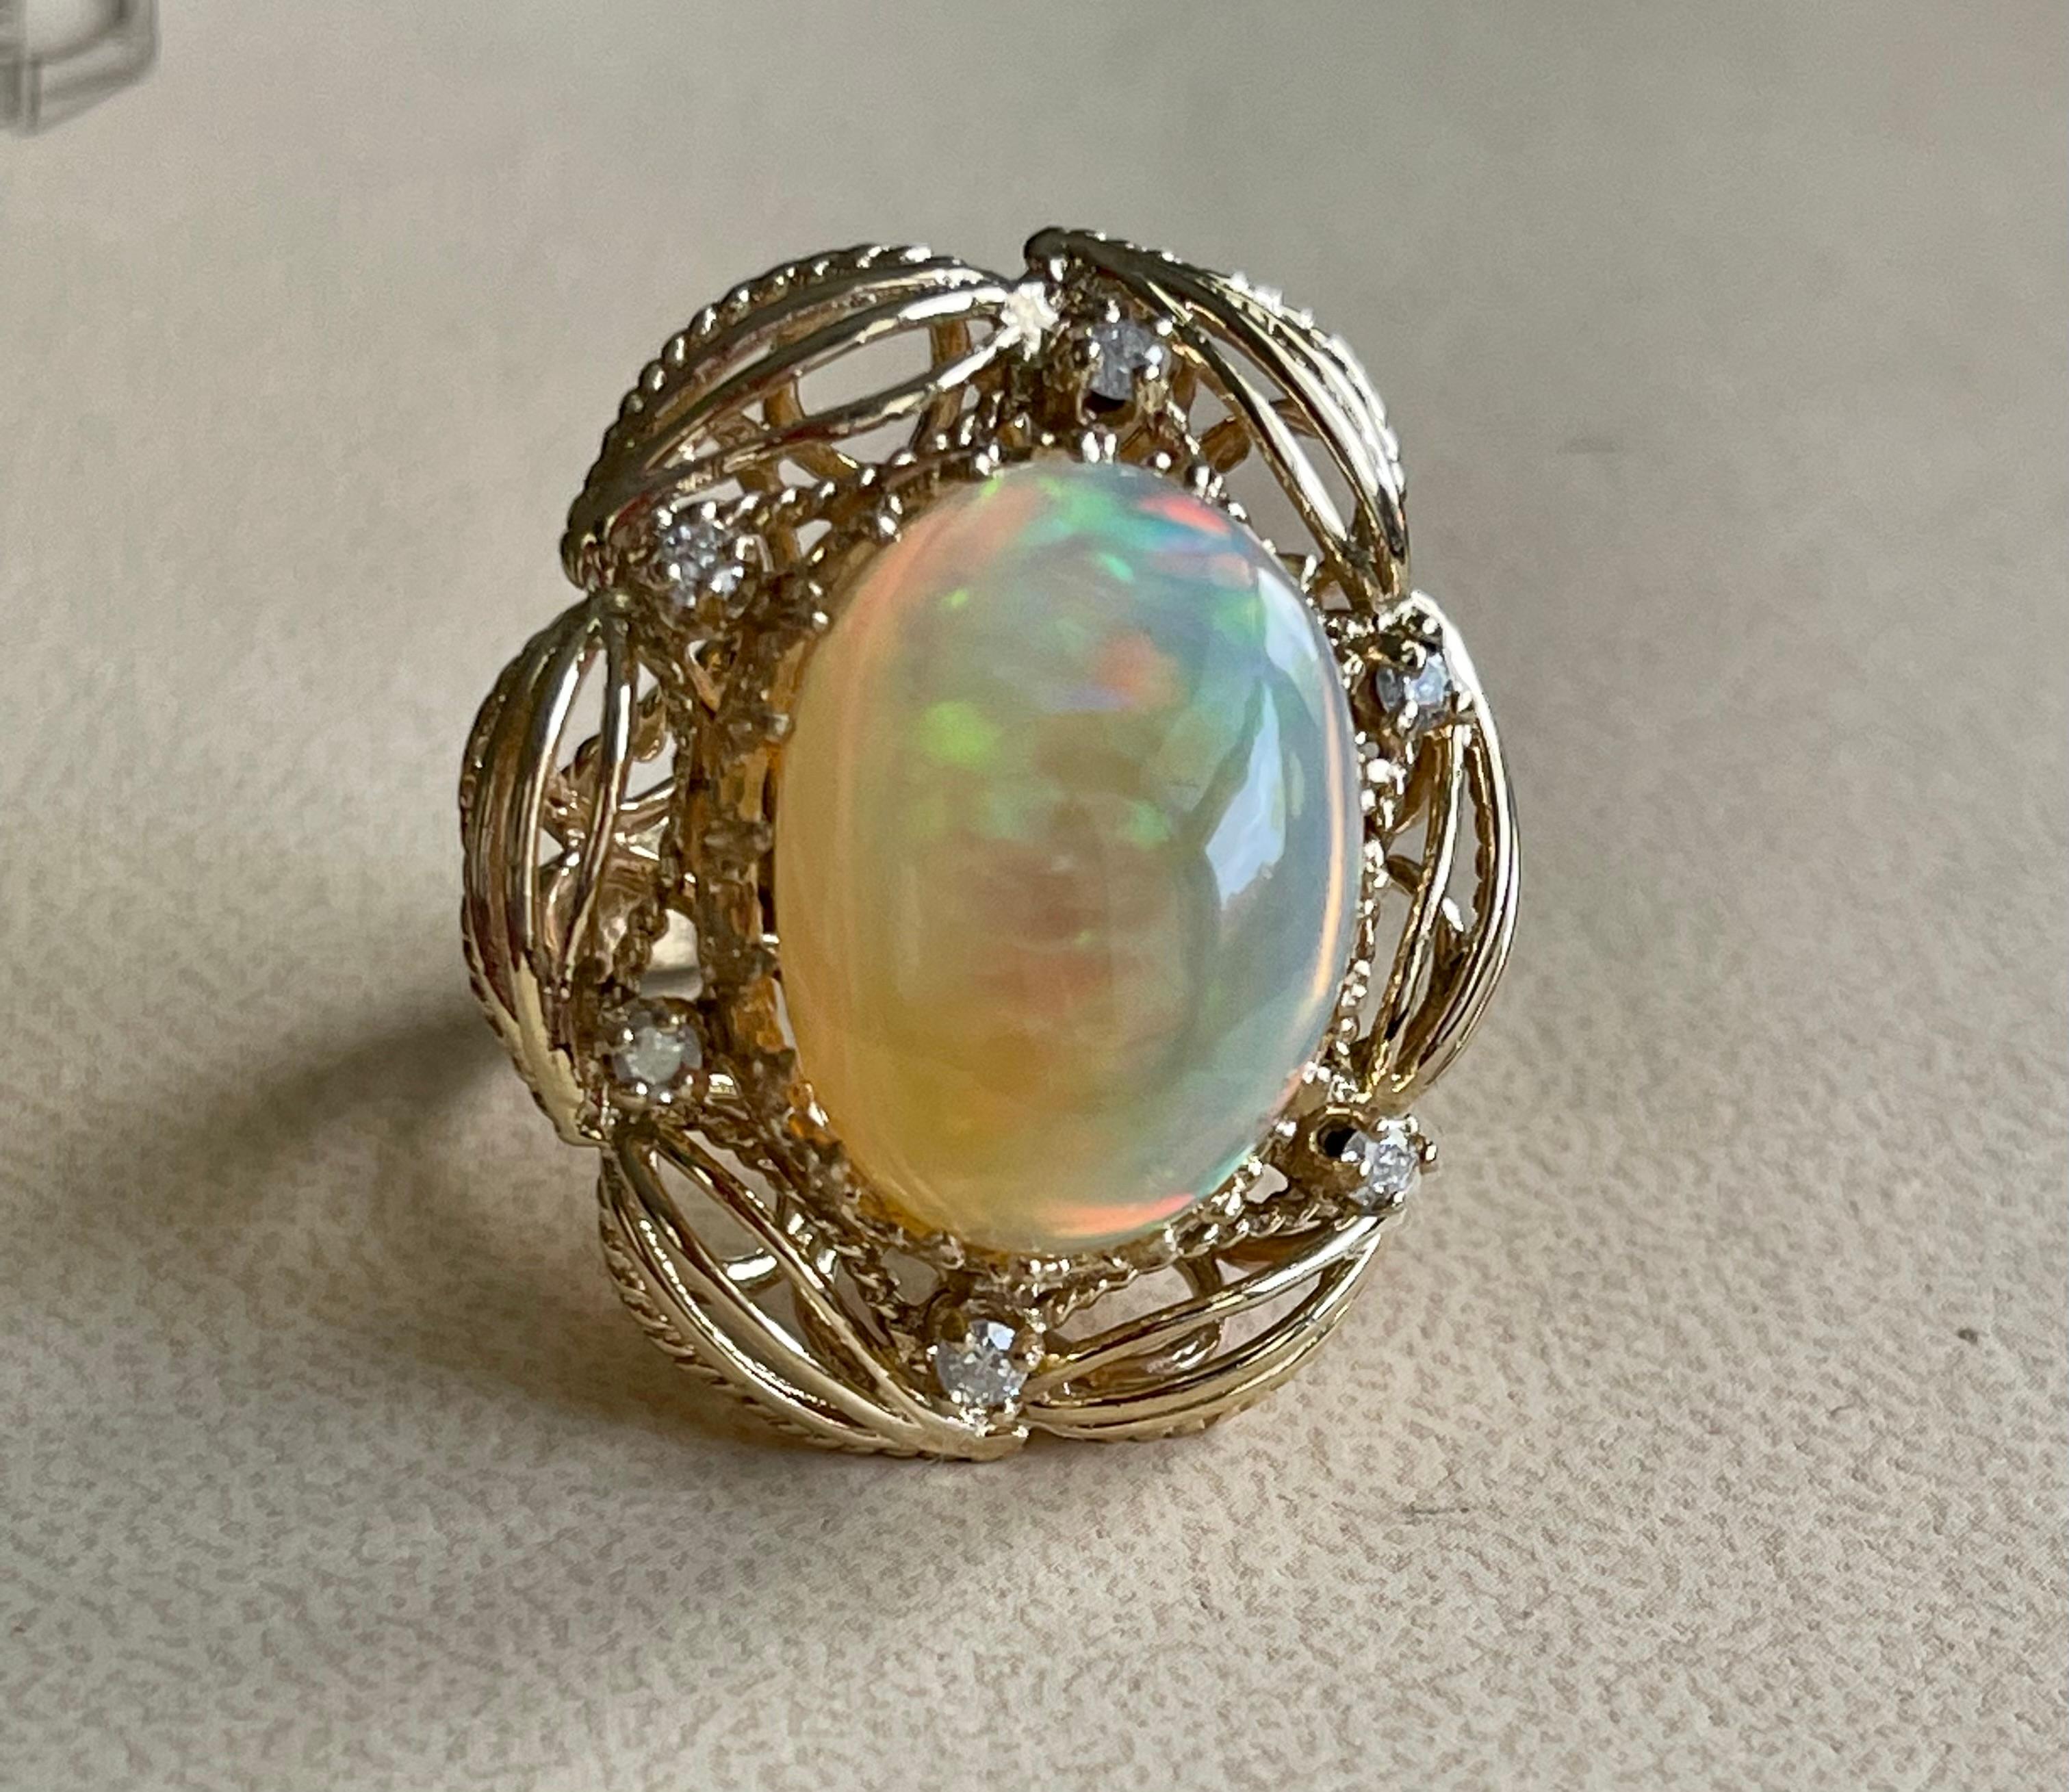 Oval Cut 15 Carat Oval Shape Ethiopian Opal Cocktail Ring 14 Karat Yellow Gold Solid Ring